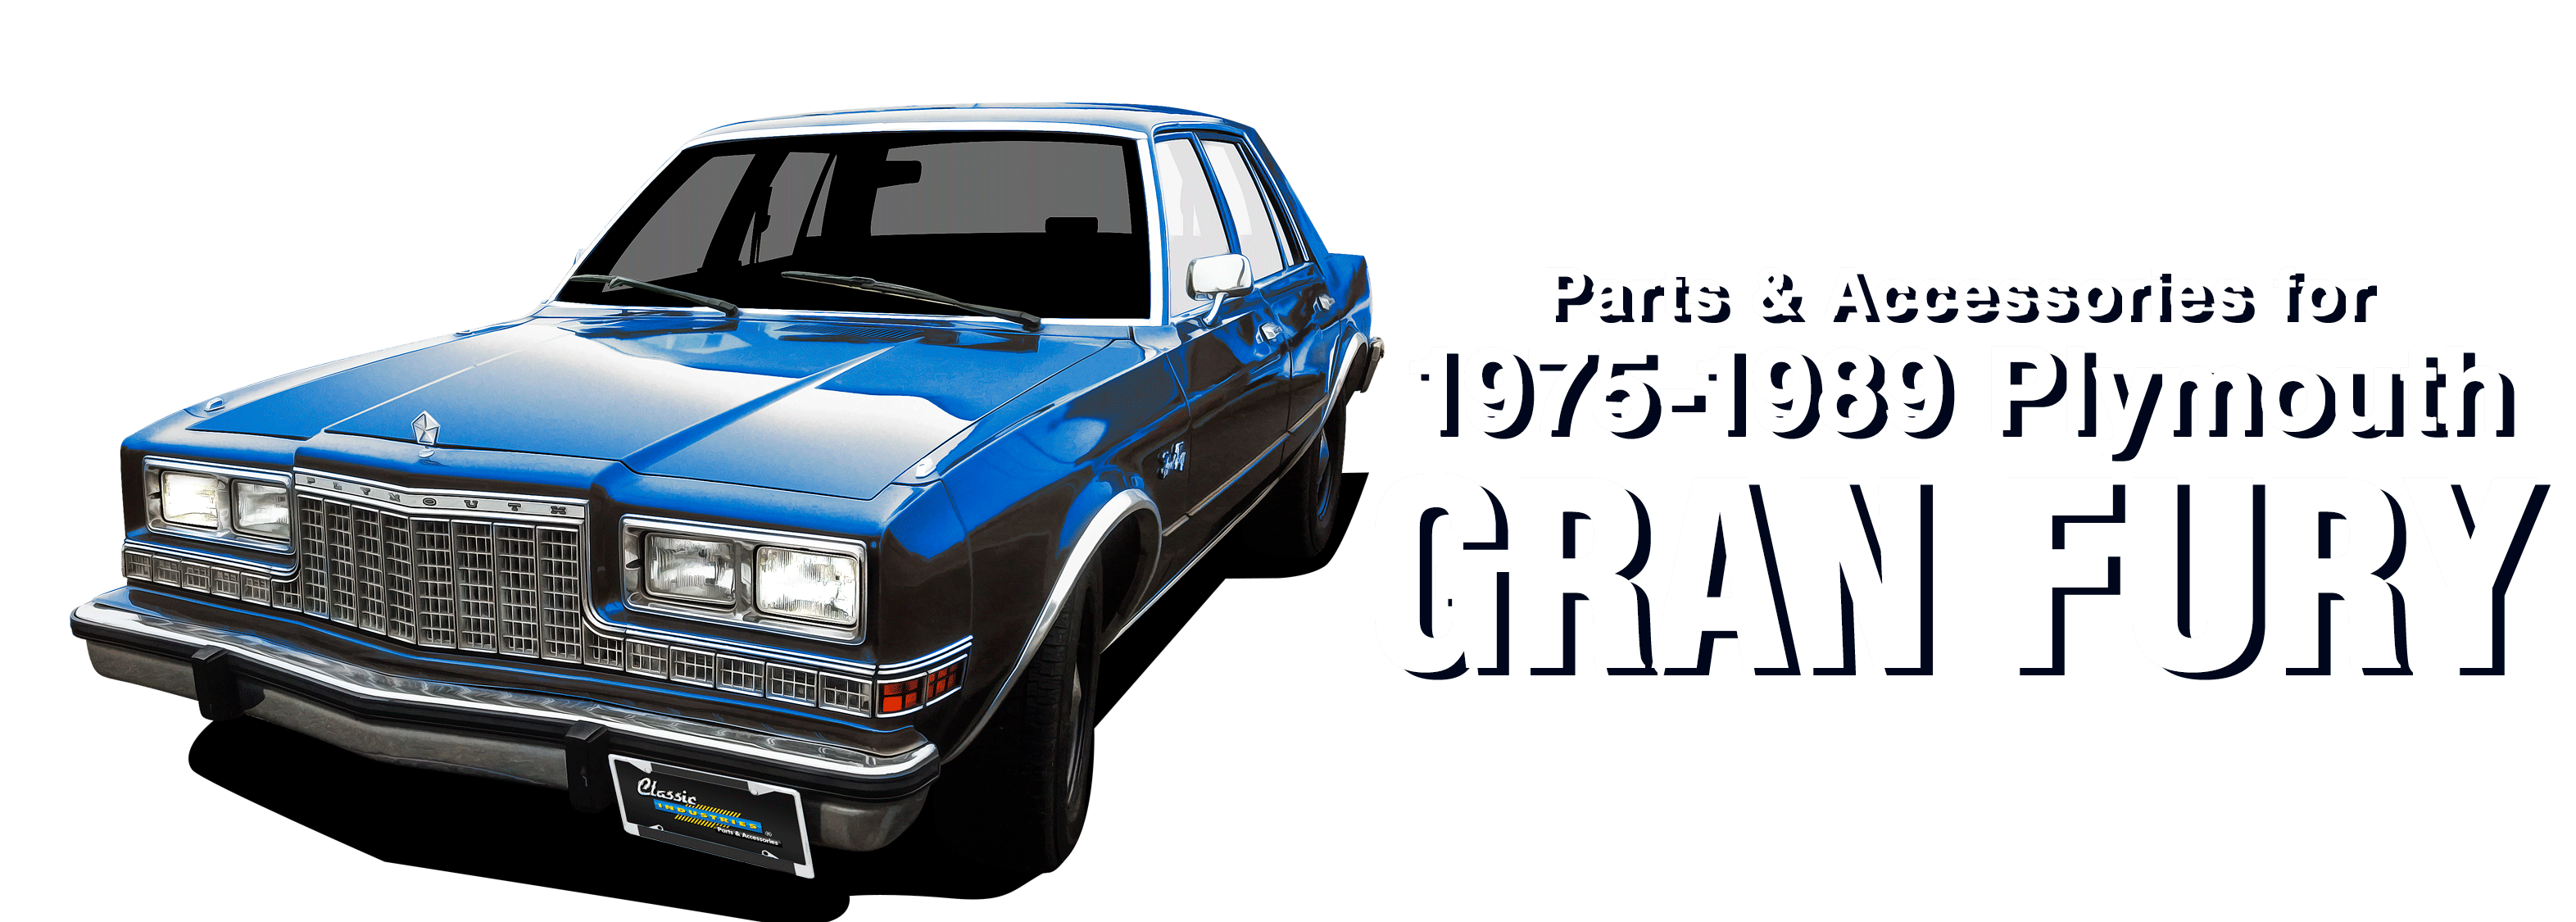 Parts & Accessories for 1975-1989 Plymouth Gran Fury